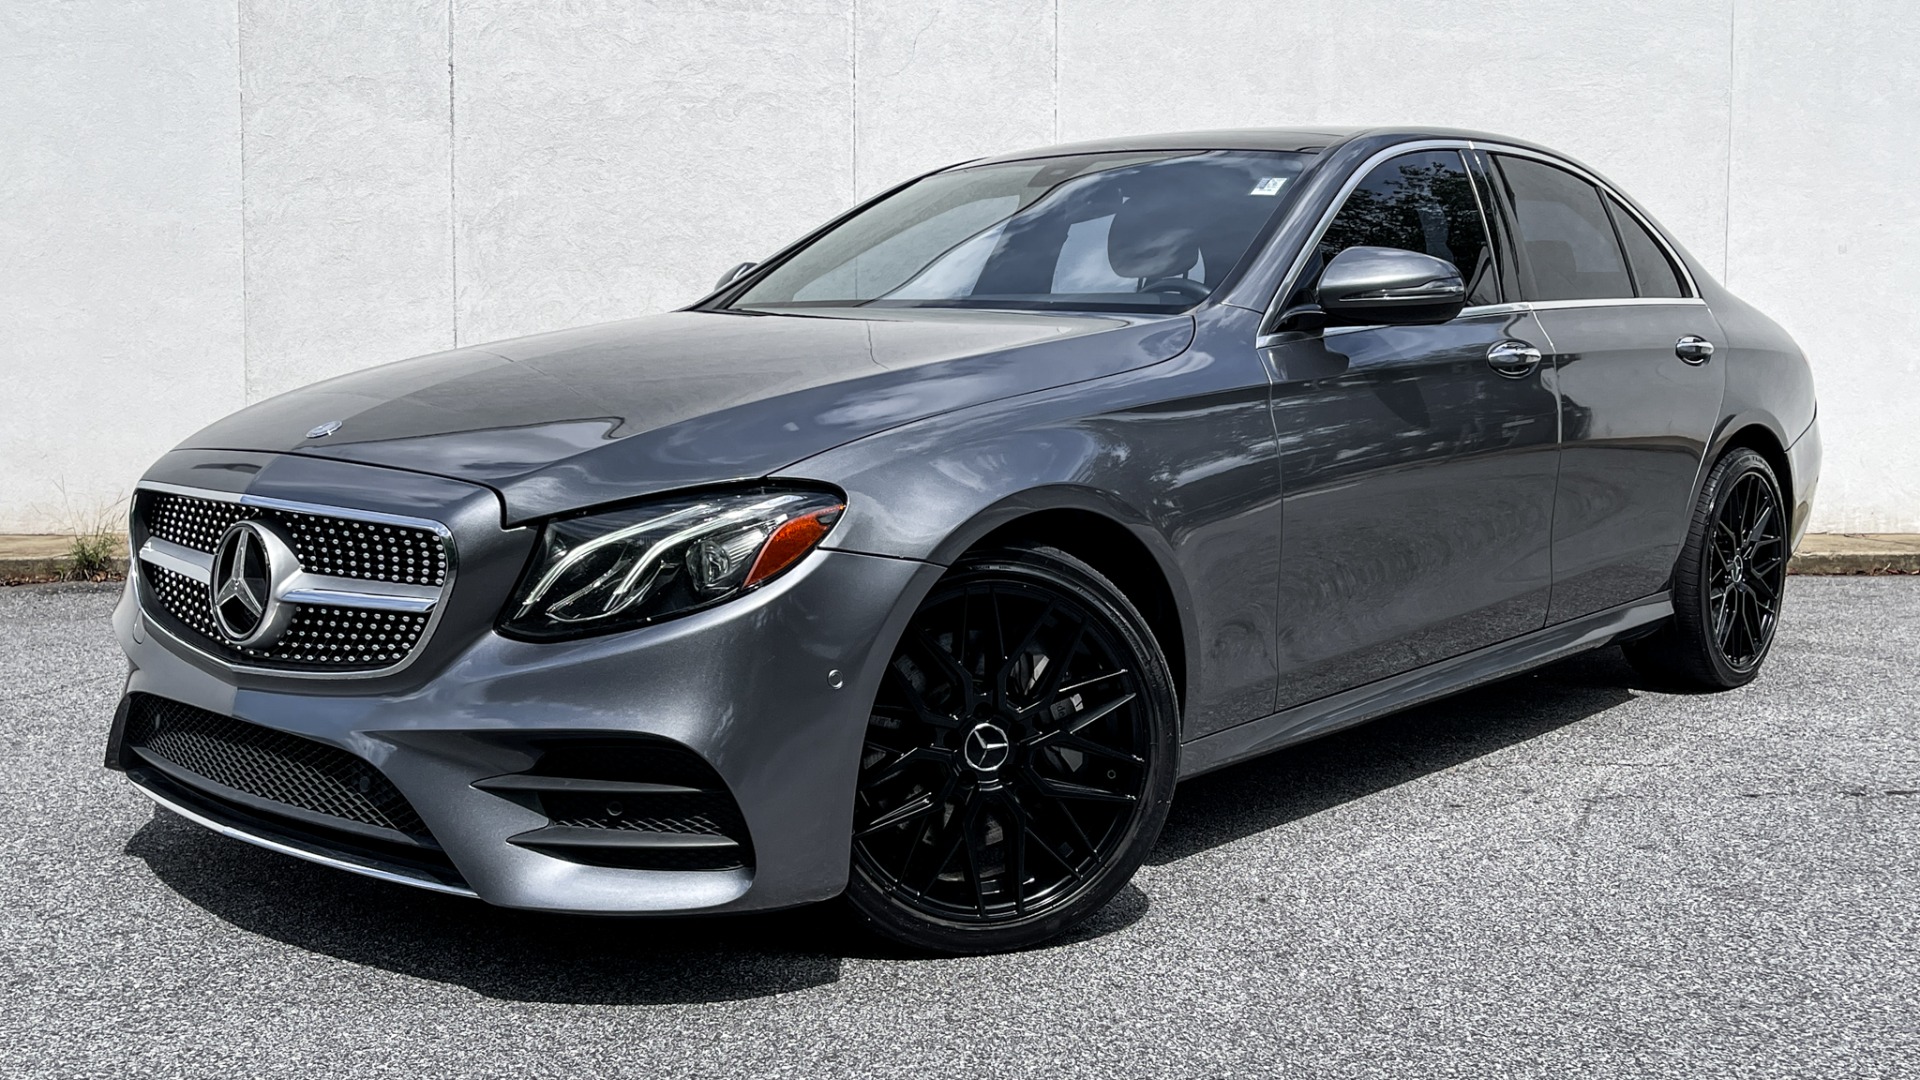 Used 2017 Mercedes-Benz E-Class E300 LUXURY / UPGRADED WHEELS / SPORT WHEEL / PREMIUM 1 / BURMESTER AUDIO for sale Sold at Formula Imports in Charlotte NC 28227 1